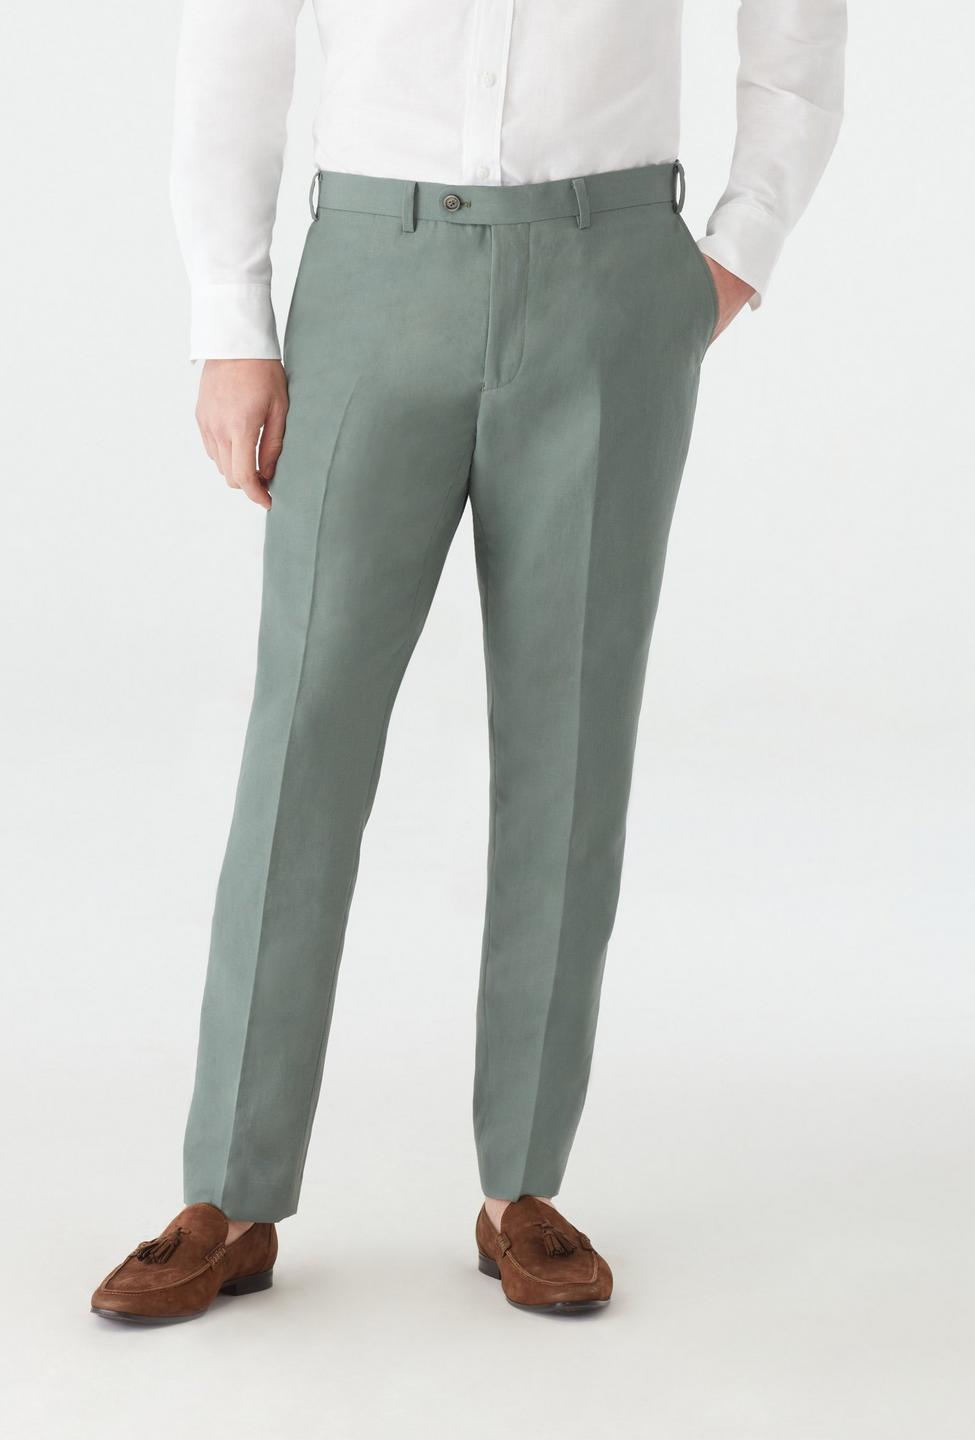 Green pants - Solid Design from Seasonal Indochino Collection